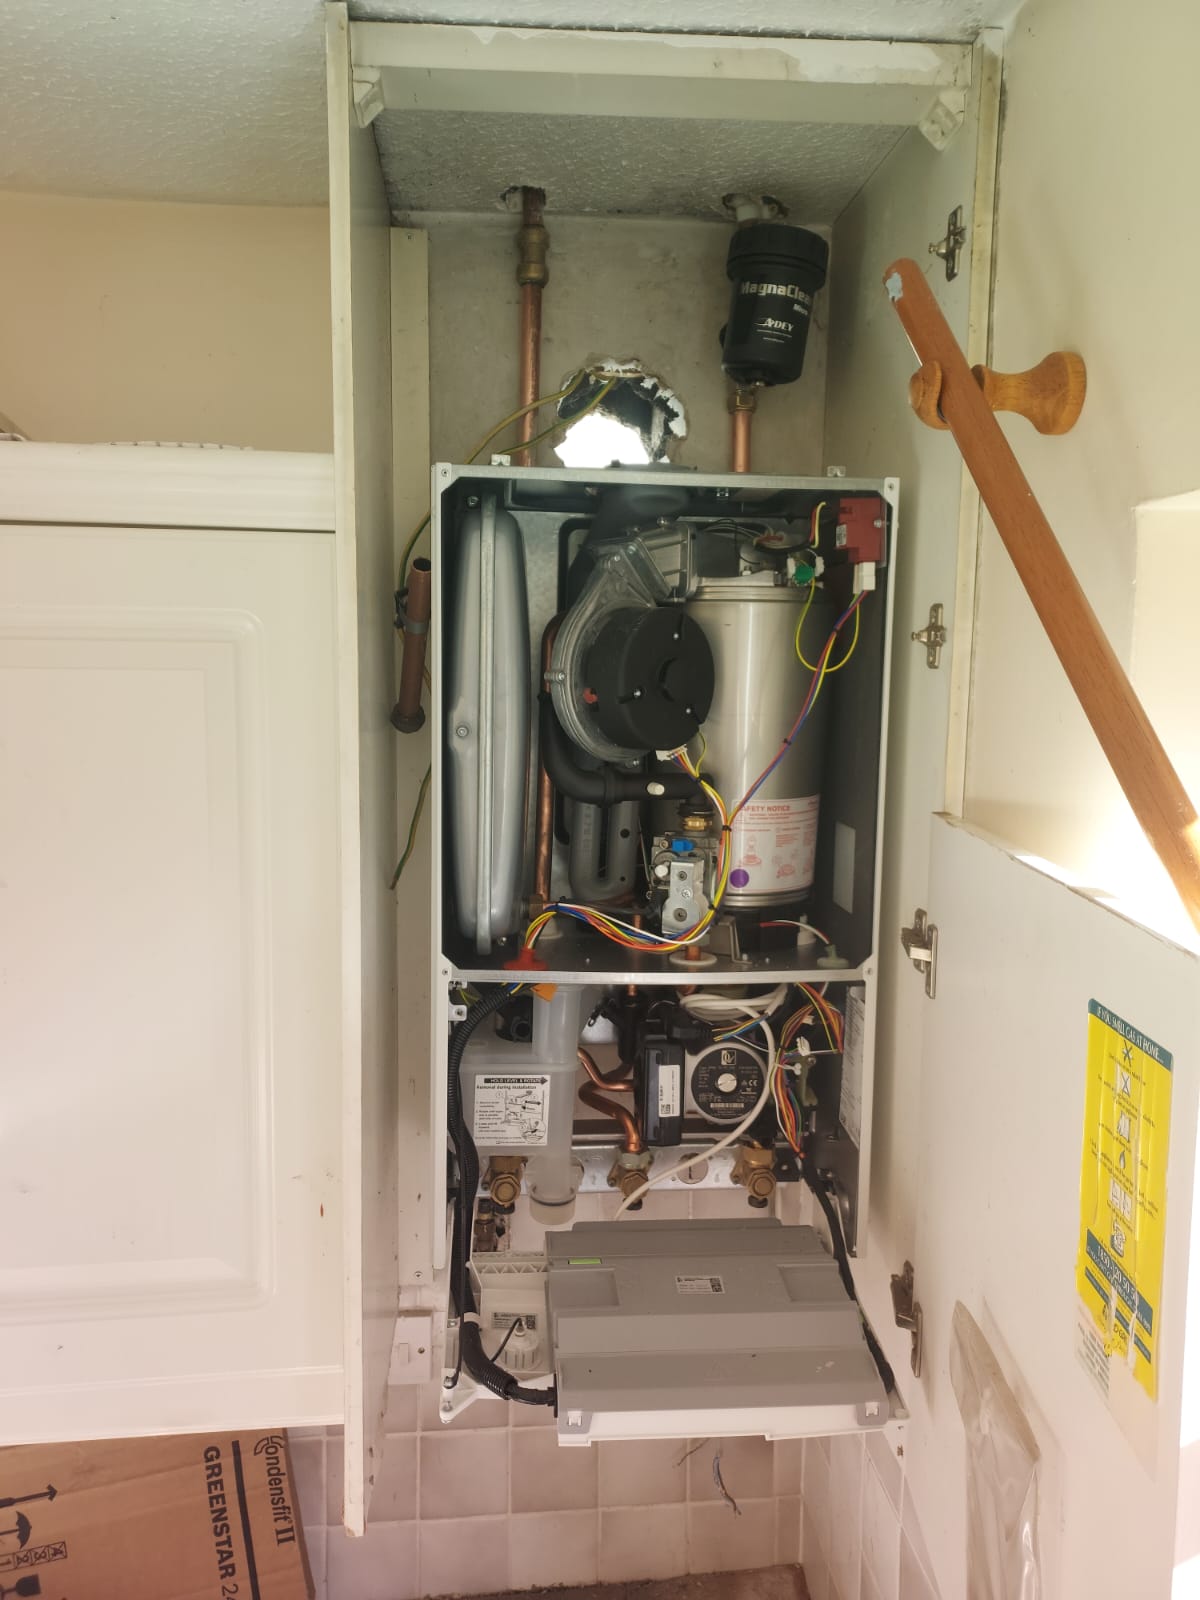 New Boiler Installation in process